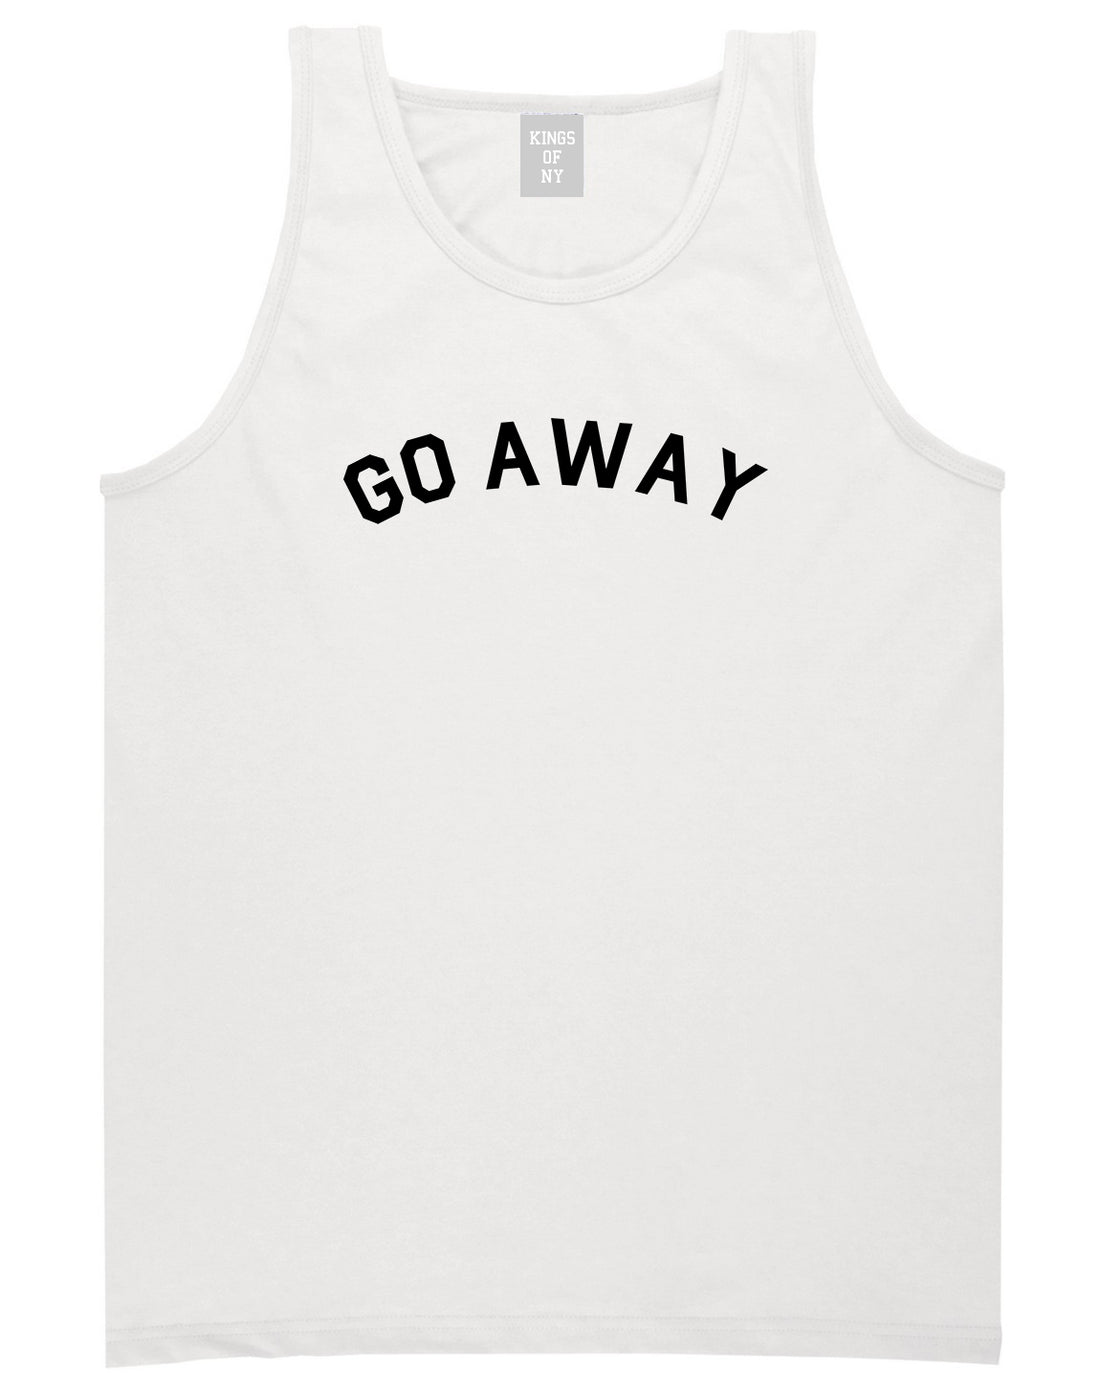 Go Away Mens White Tank Top Shirt by KINGS OF NY